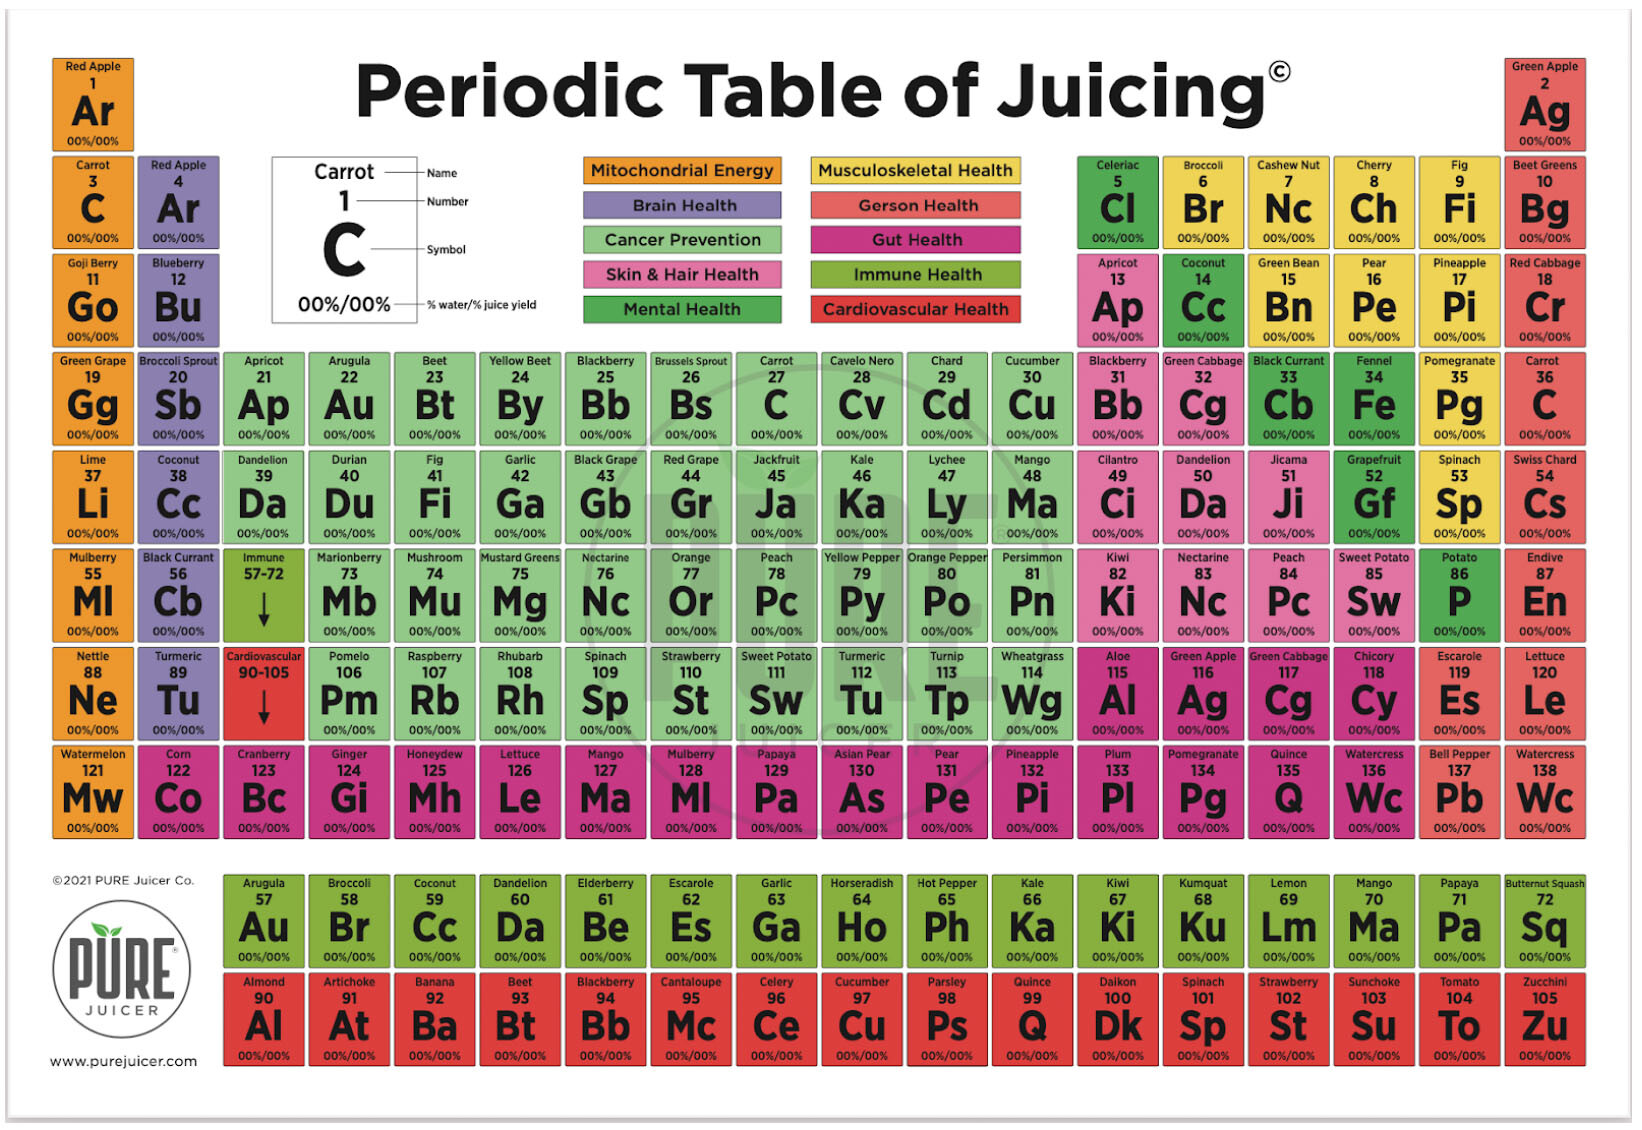 Periodic Table of Juicing